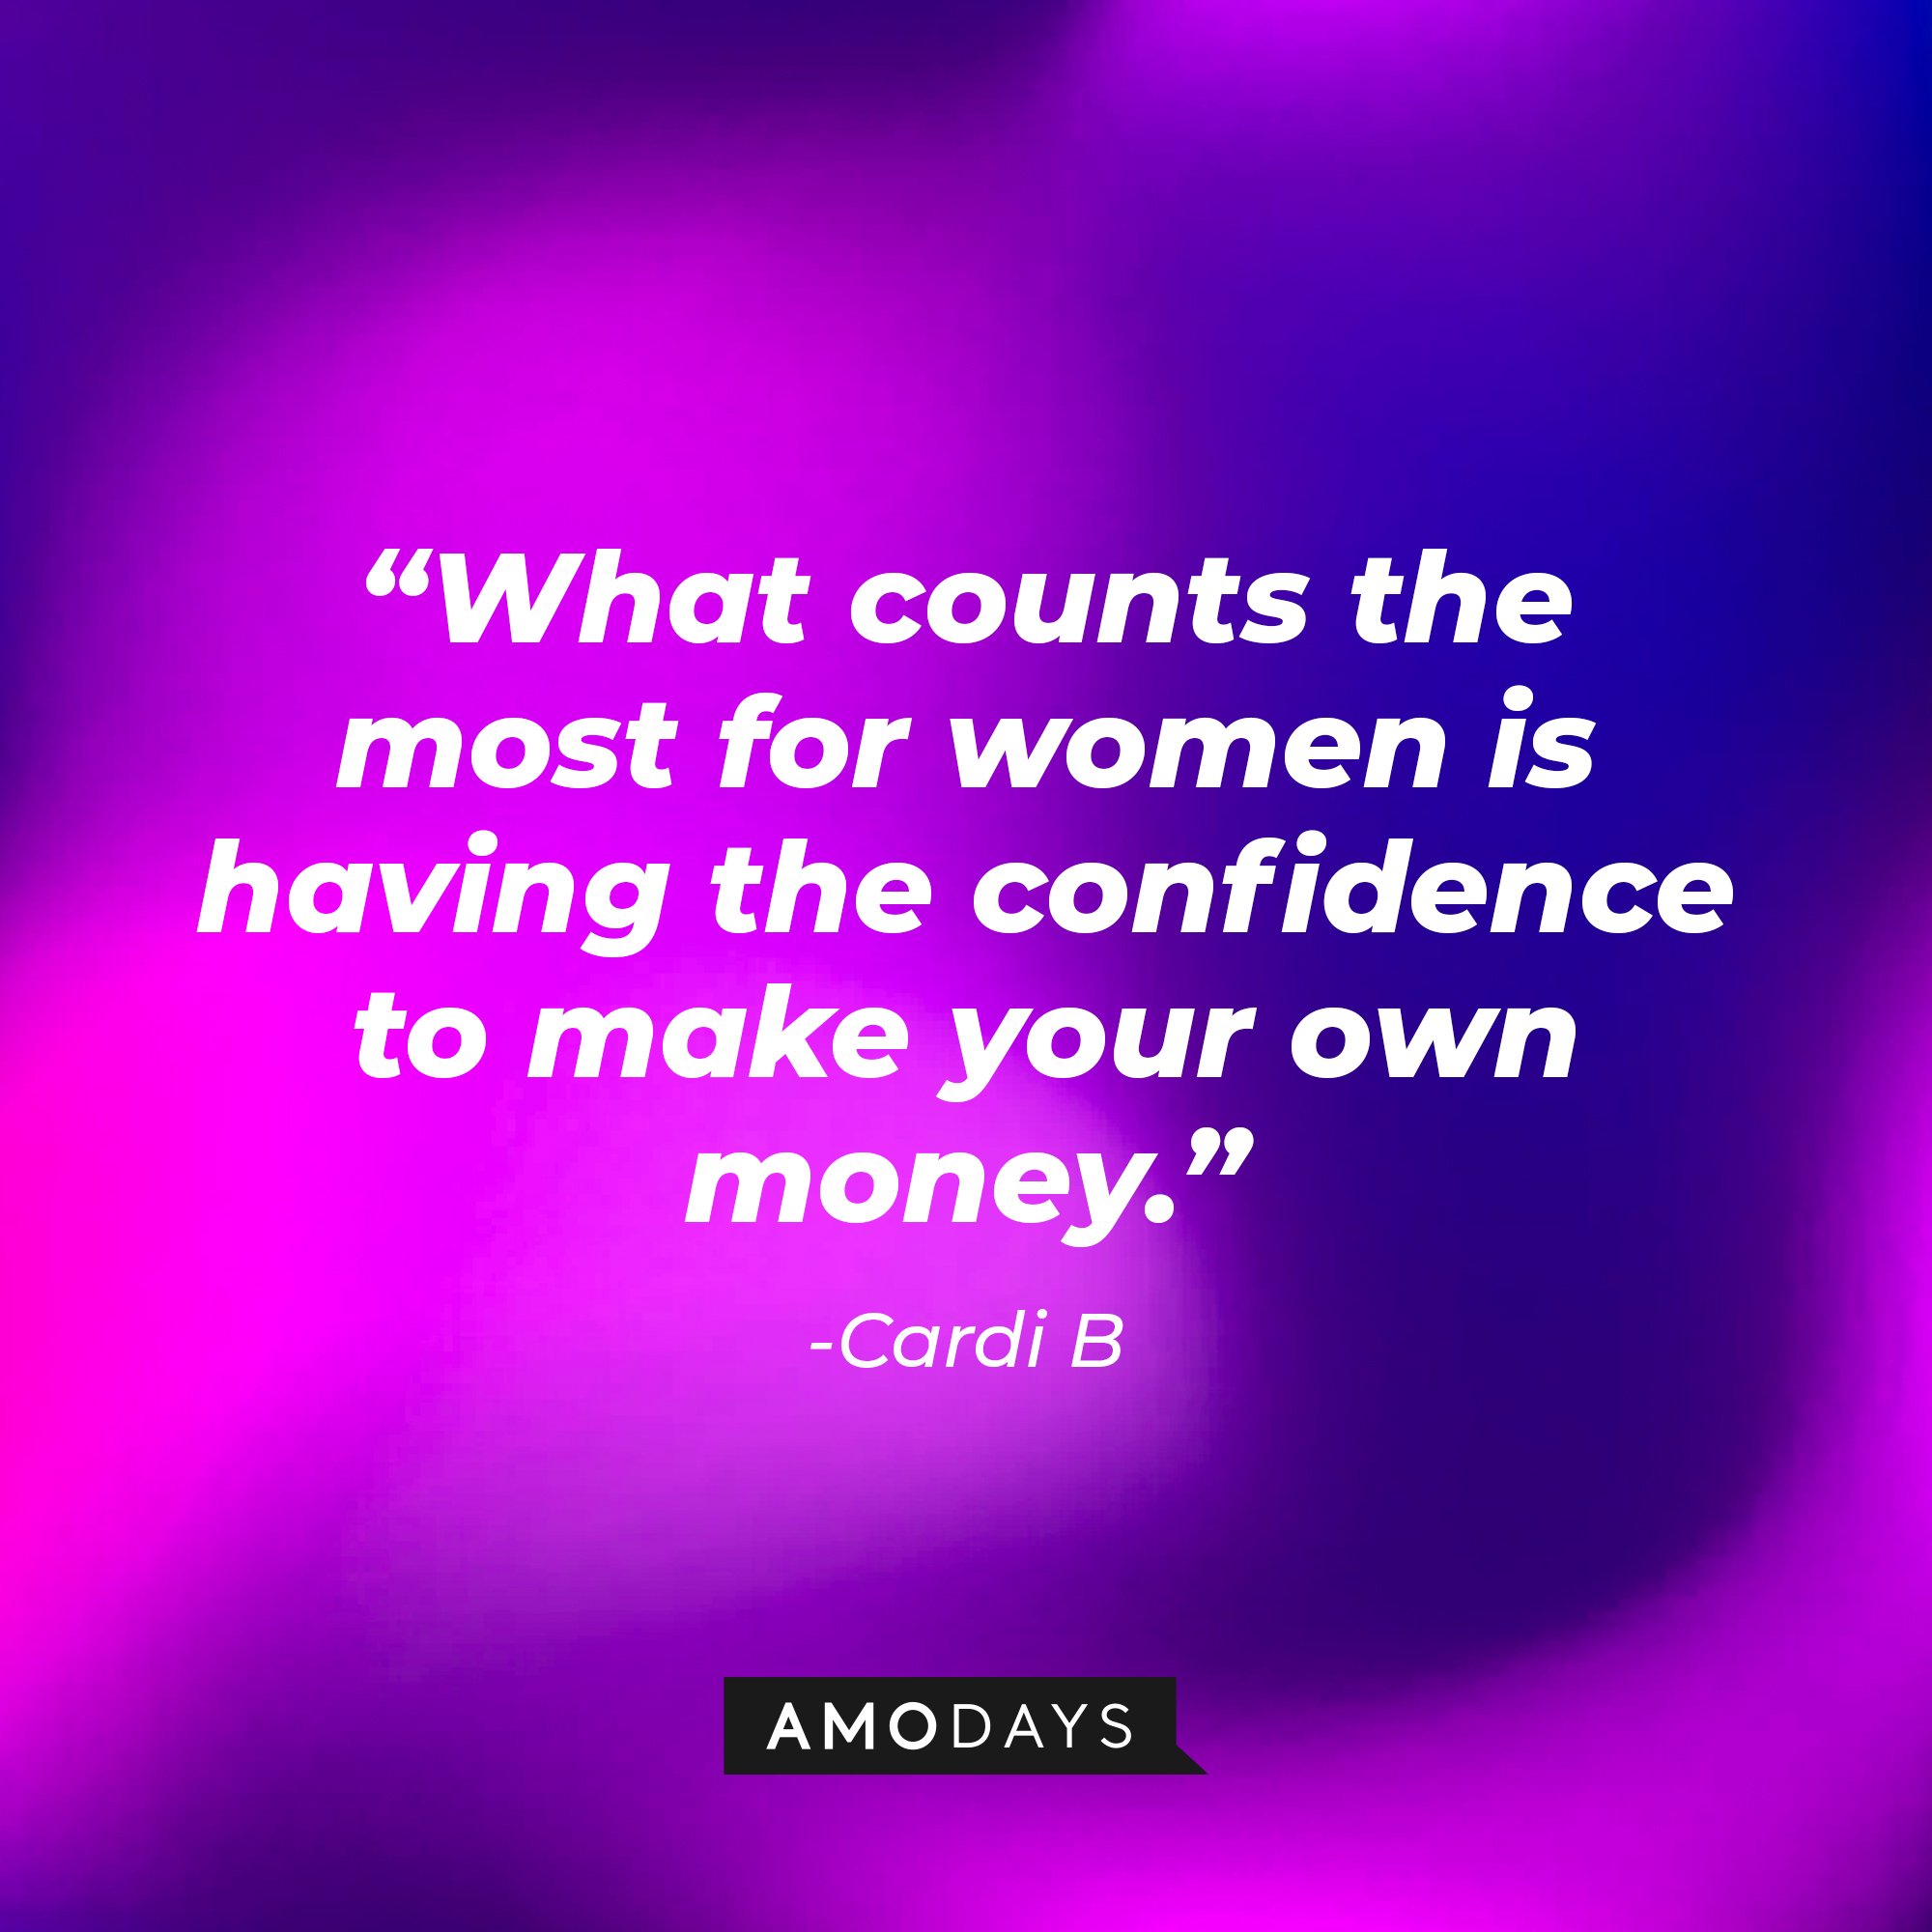 Cardi B's quotes: "What counts the most for women is having the confidence to make your own money." | Image: AmoDays